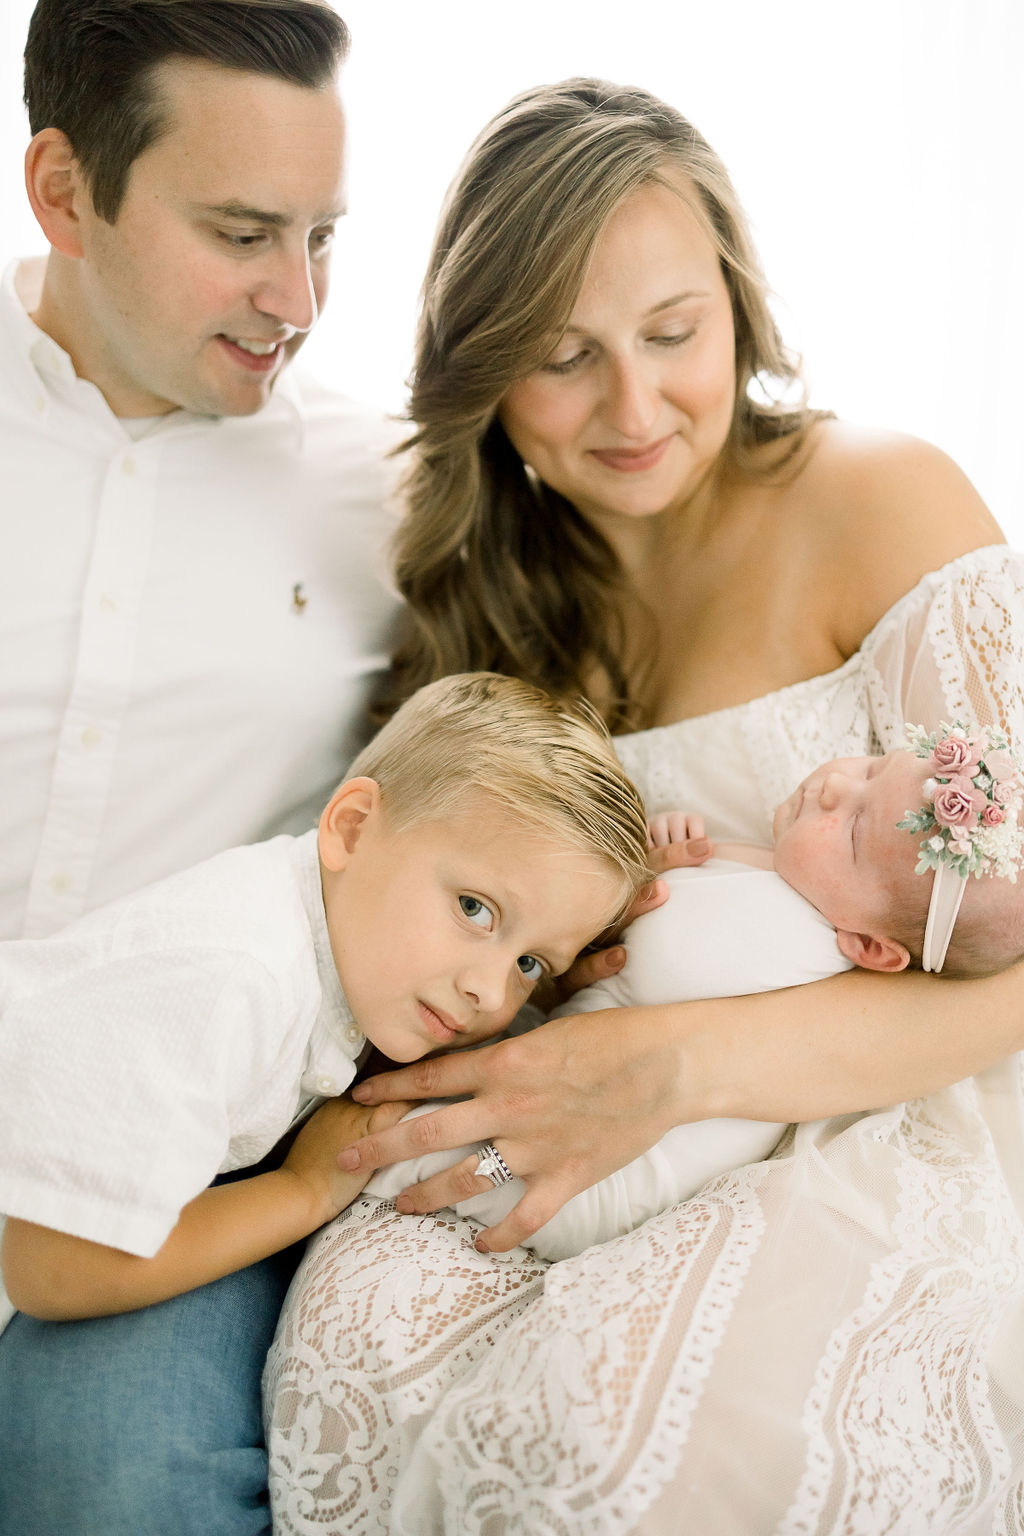 Mother in a white lace dress holds her newborn while older brother rests head on her hand max and luna